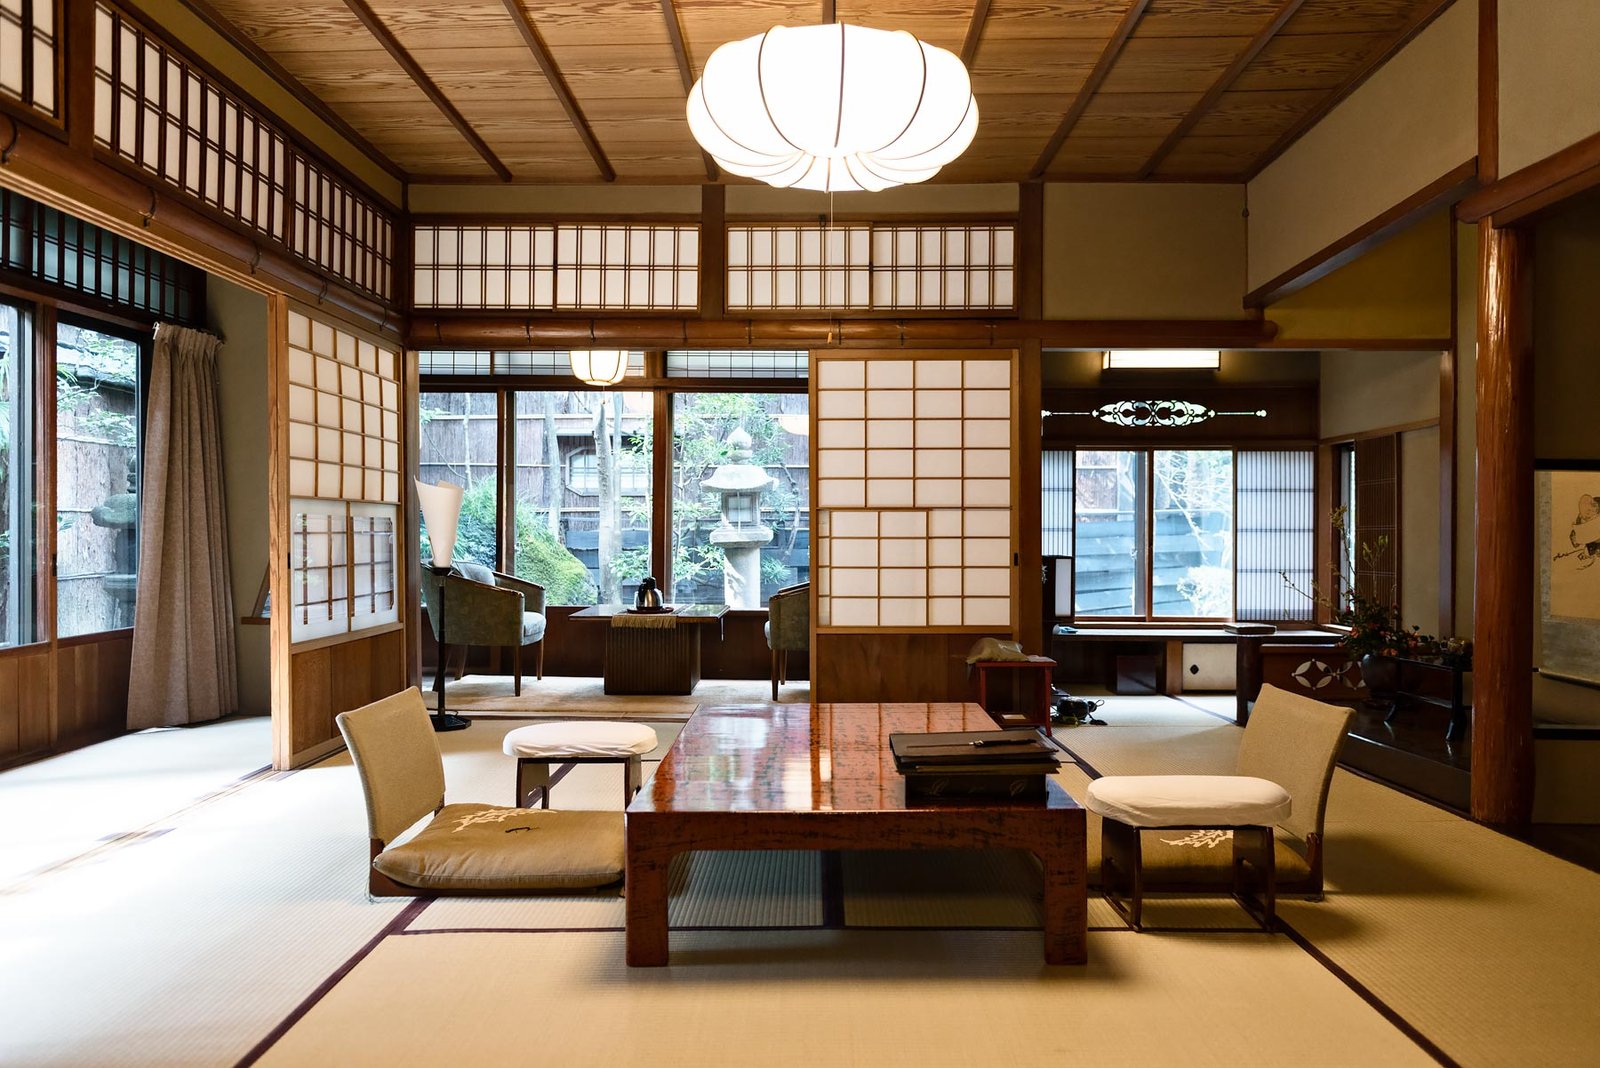 The ultimate Japanese experience: staying at a traditional ryokan in Kyoto